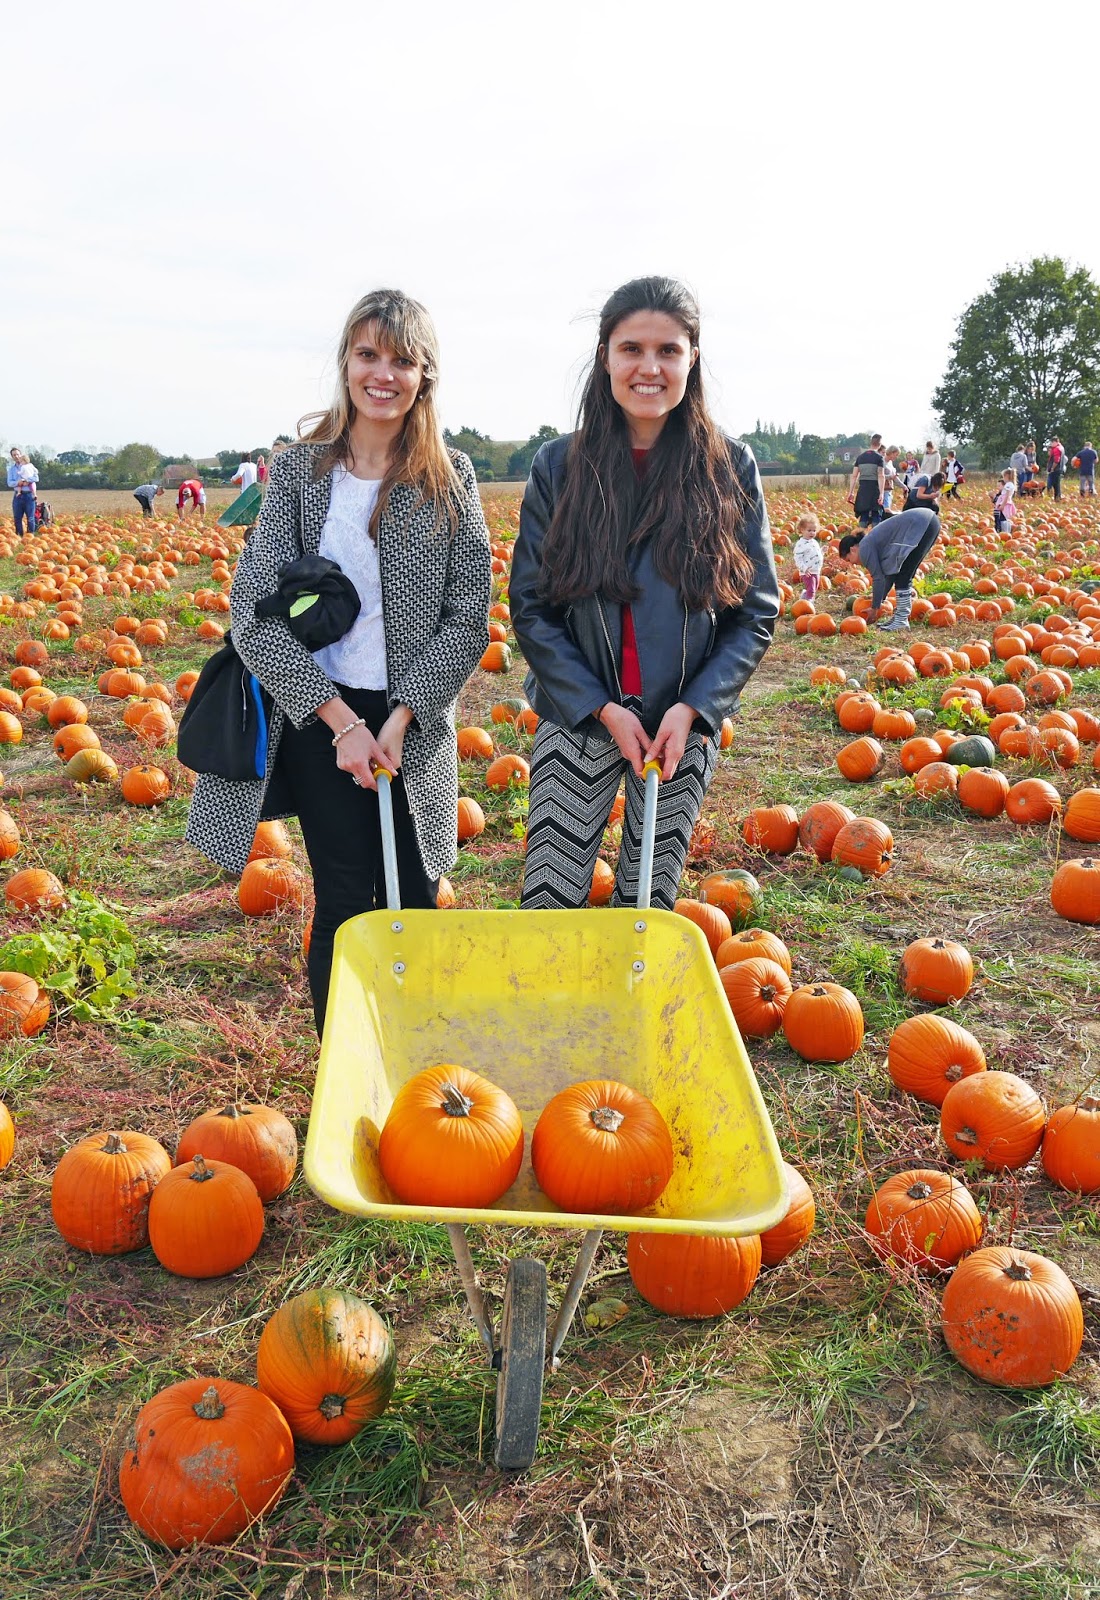 Kat Last and Steph at Pick Your Own Pumpkin in Sevington, Ashford